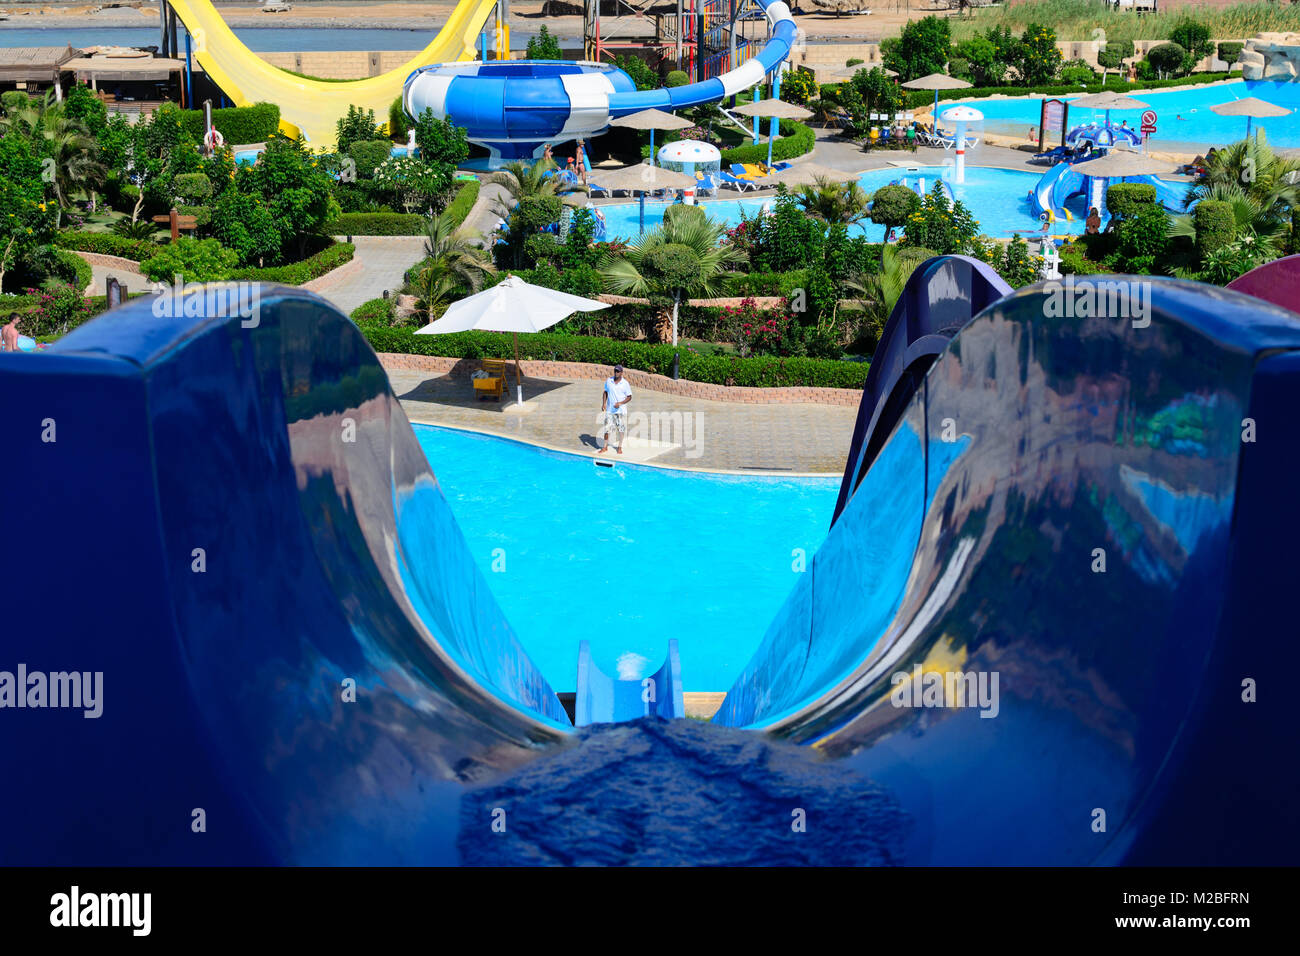 Waterpark slides with a swimming pool photo Stock Photo